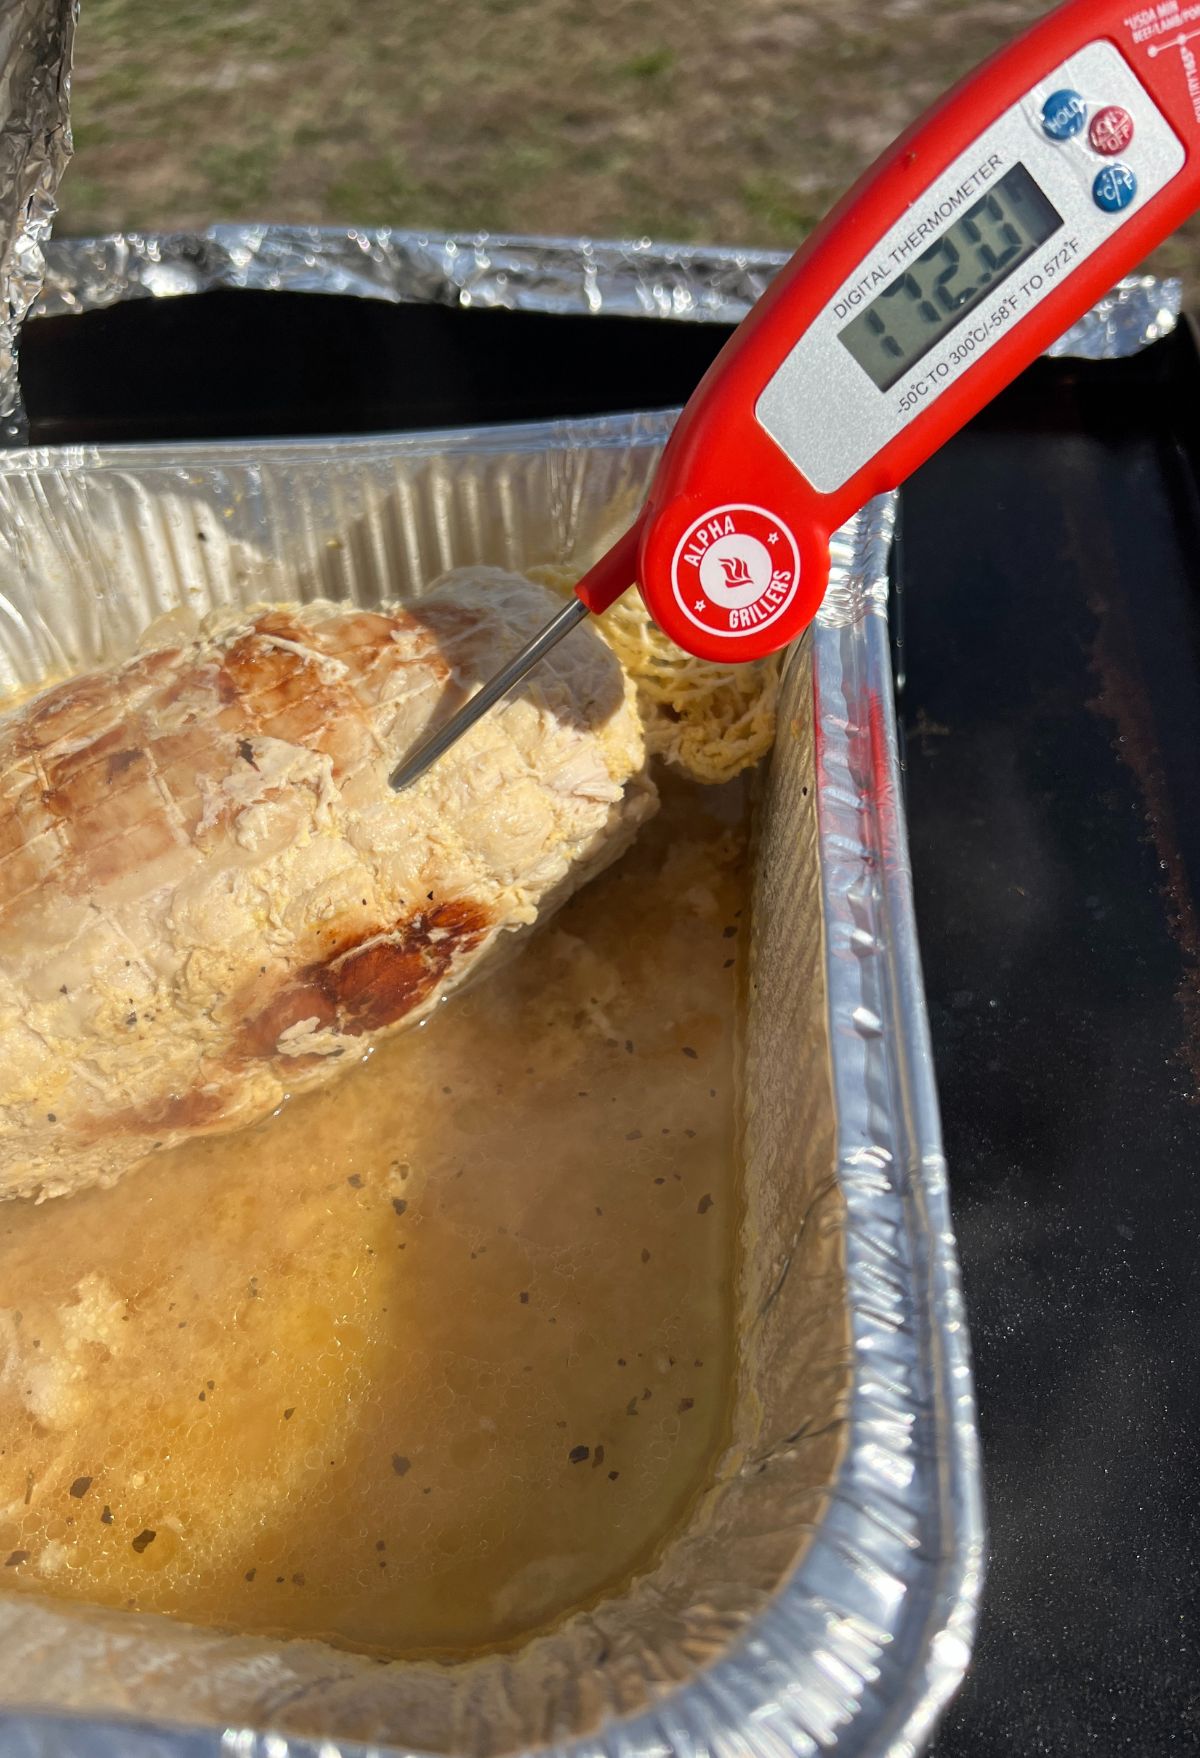 A thermometer is being used to check the temperature of a piece of meat.